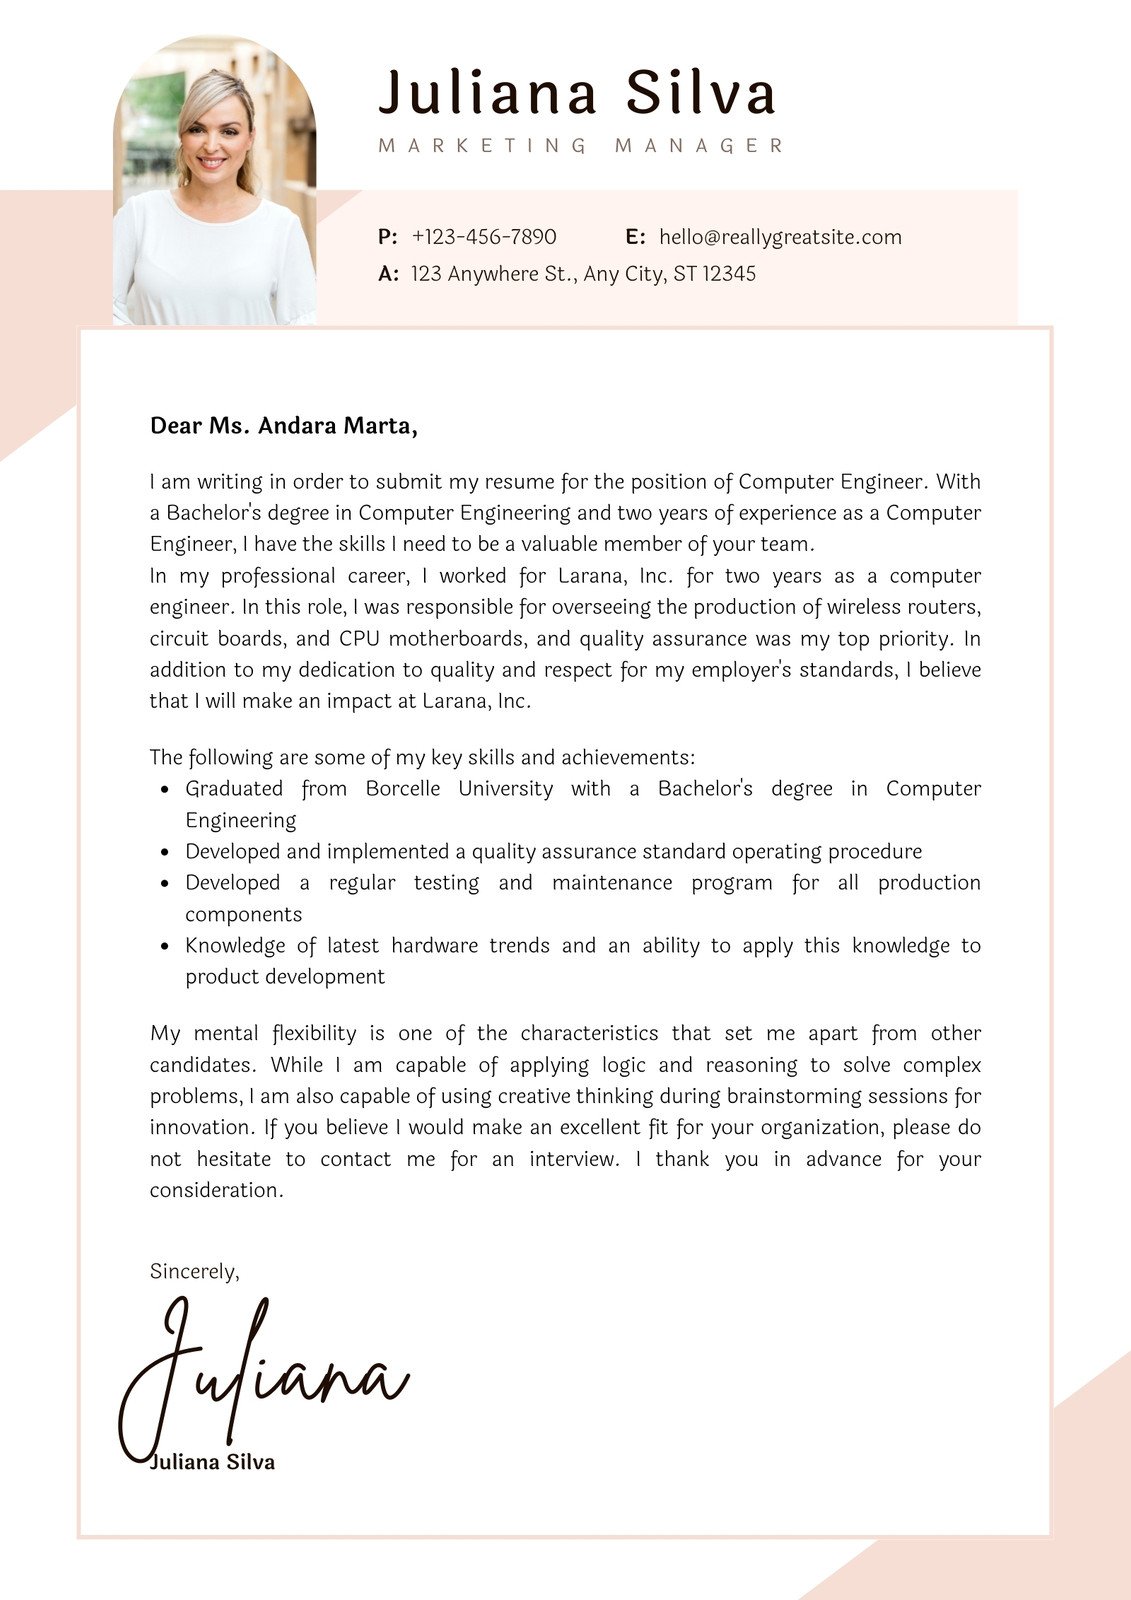 Tester Cover Letter Template in PDF - FREE Download